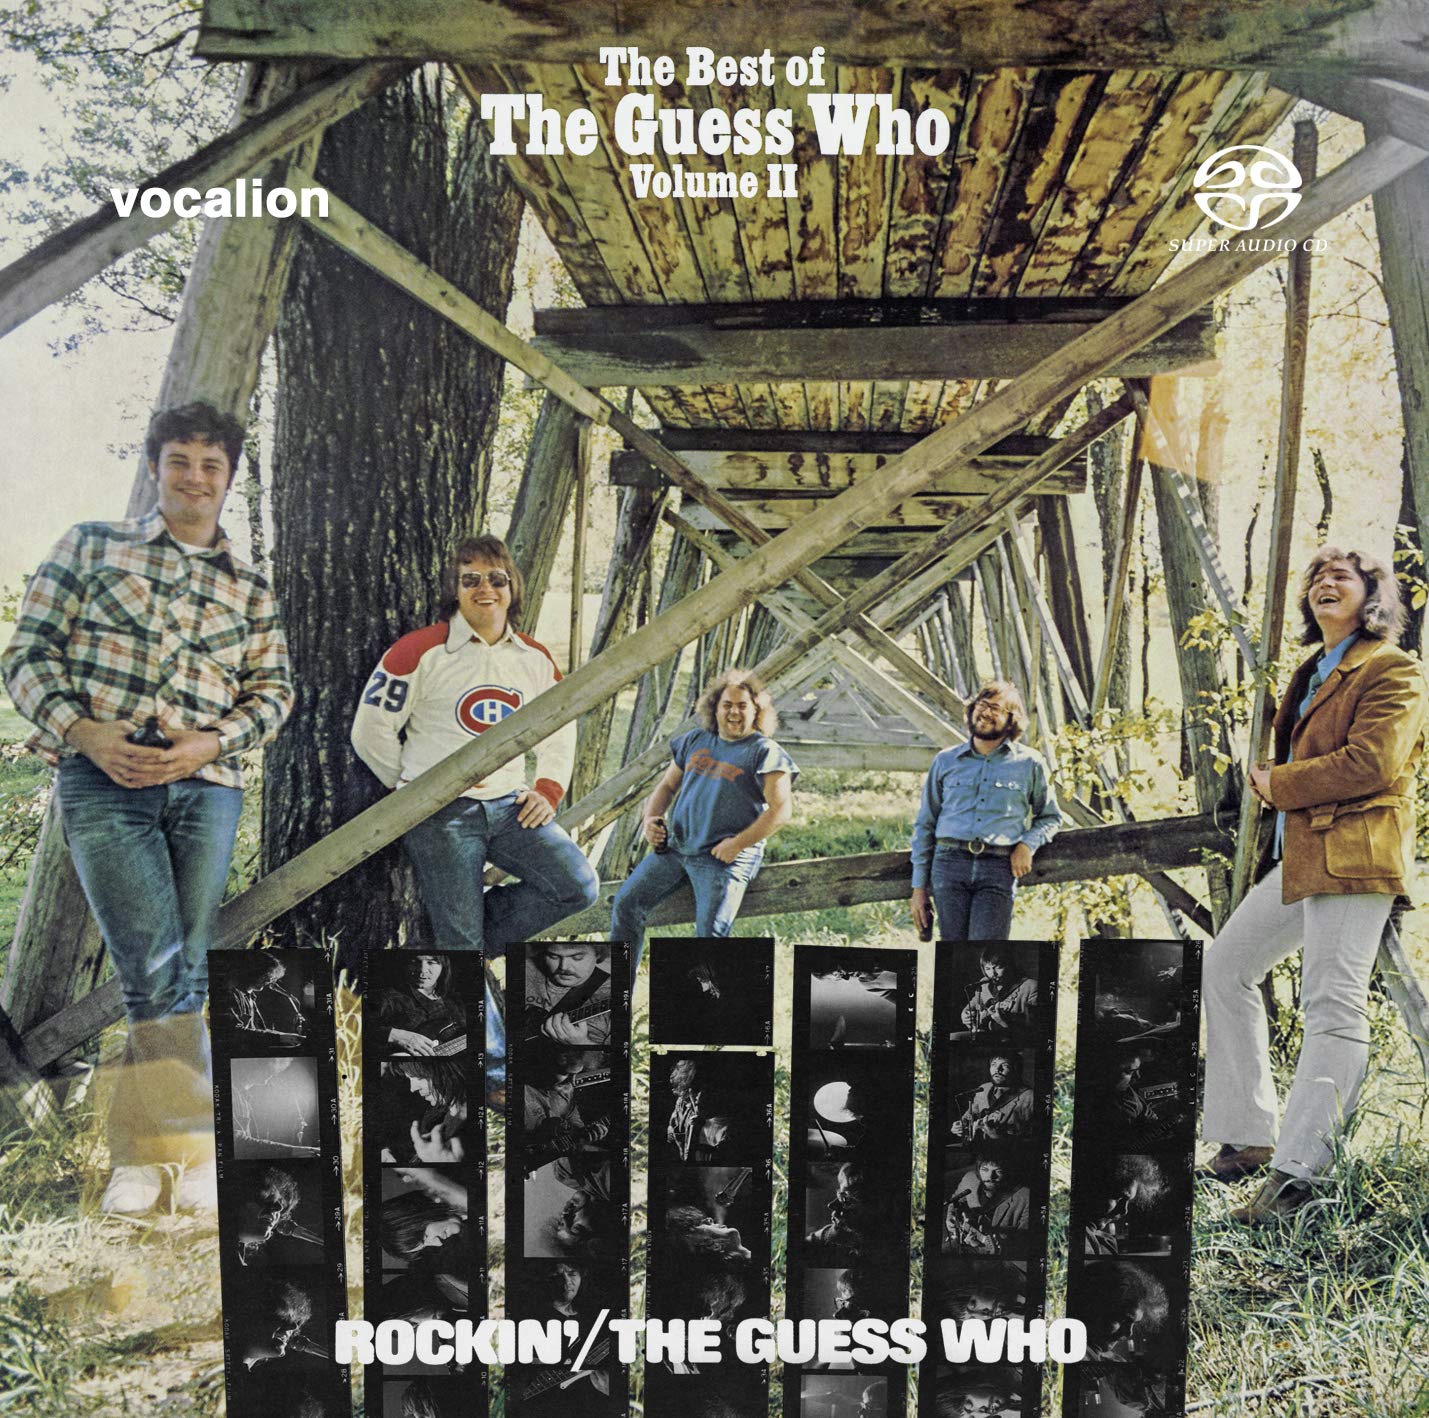 The Guess Who - Rockin’ & The Best Of The Guess Who Vol. 2 (1972+73) MCH SACD ISO + FLAC 24bit/96kHz